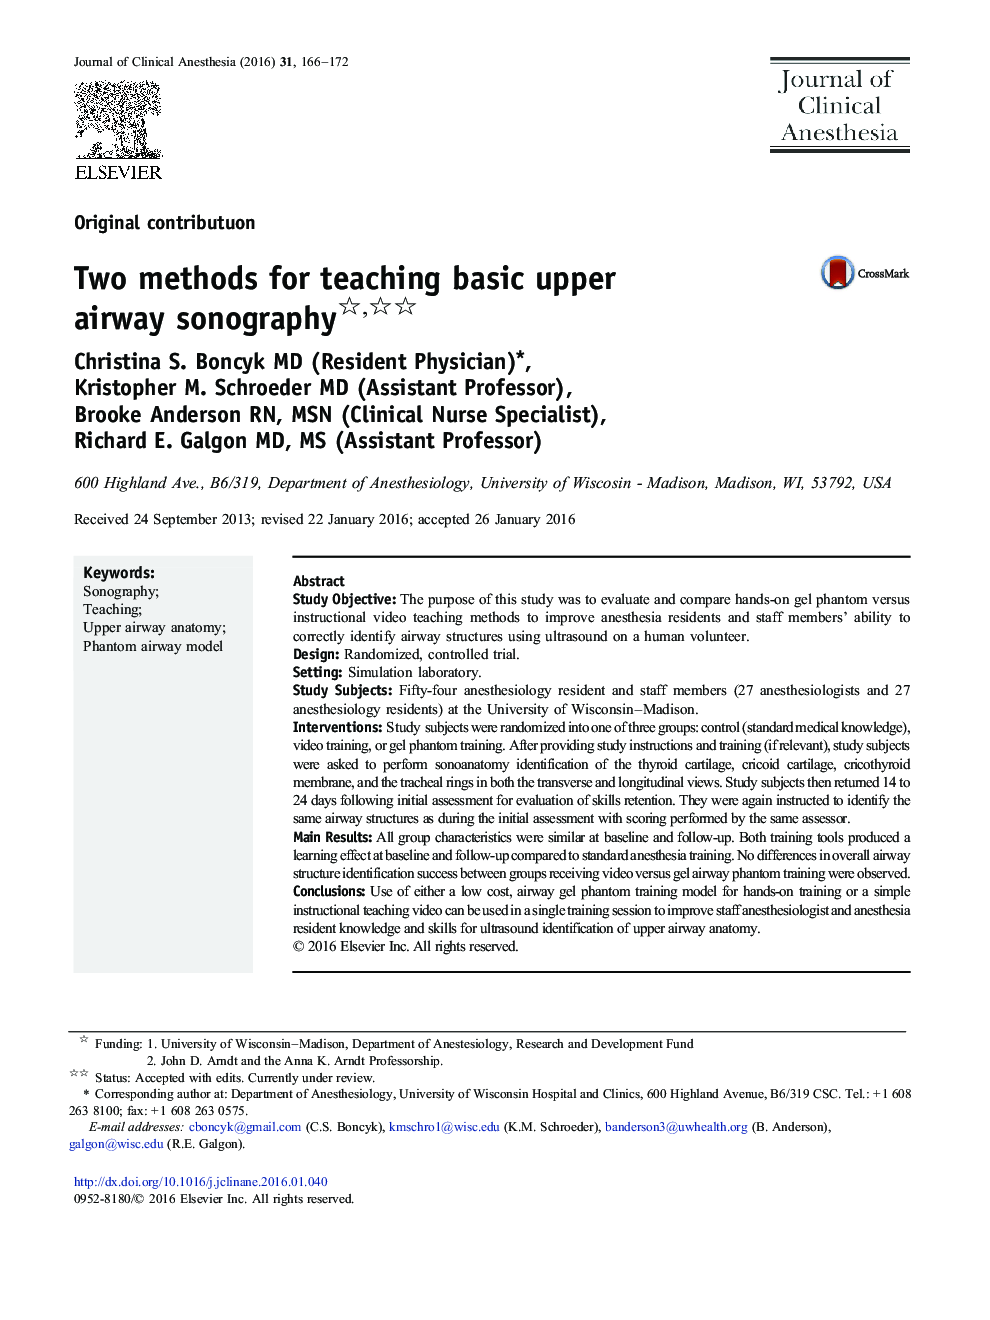 Two methods for teaching basic upper airway sonography